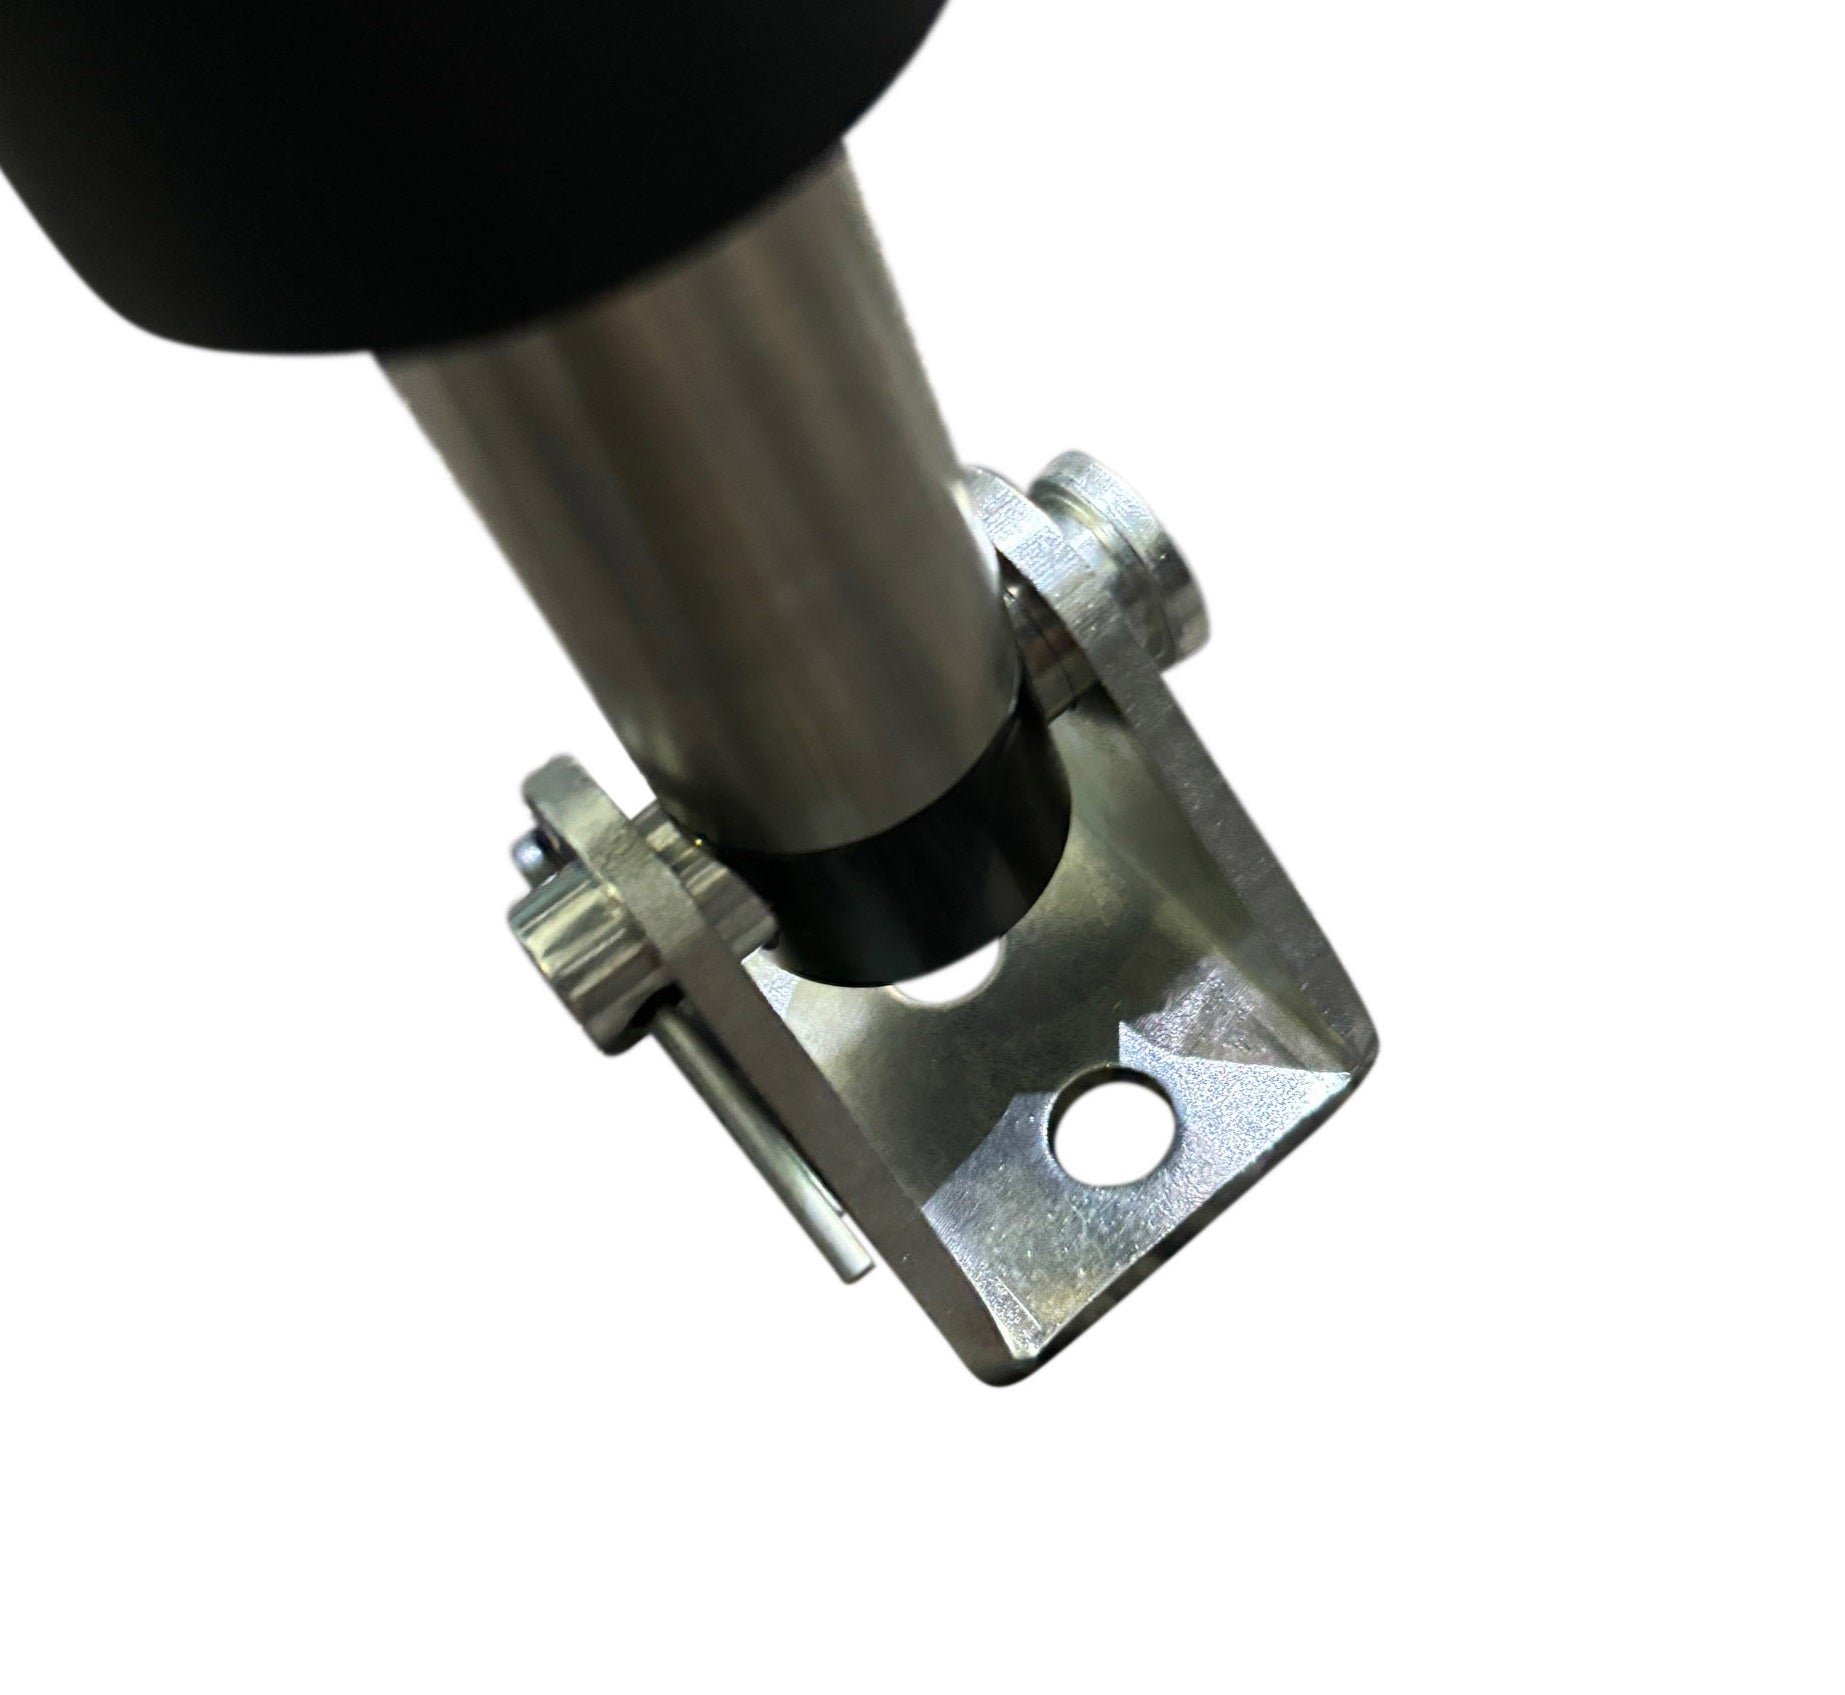 MB18 Mounting Brackets Product Image